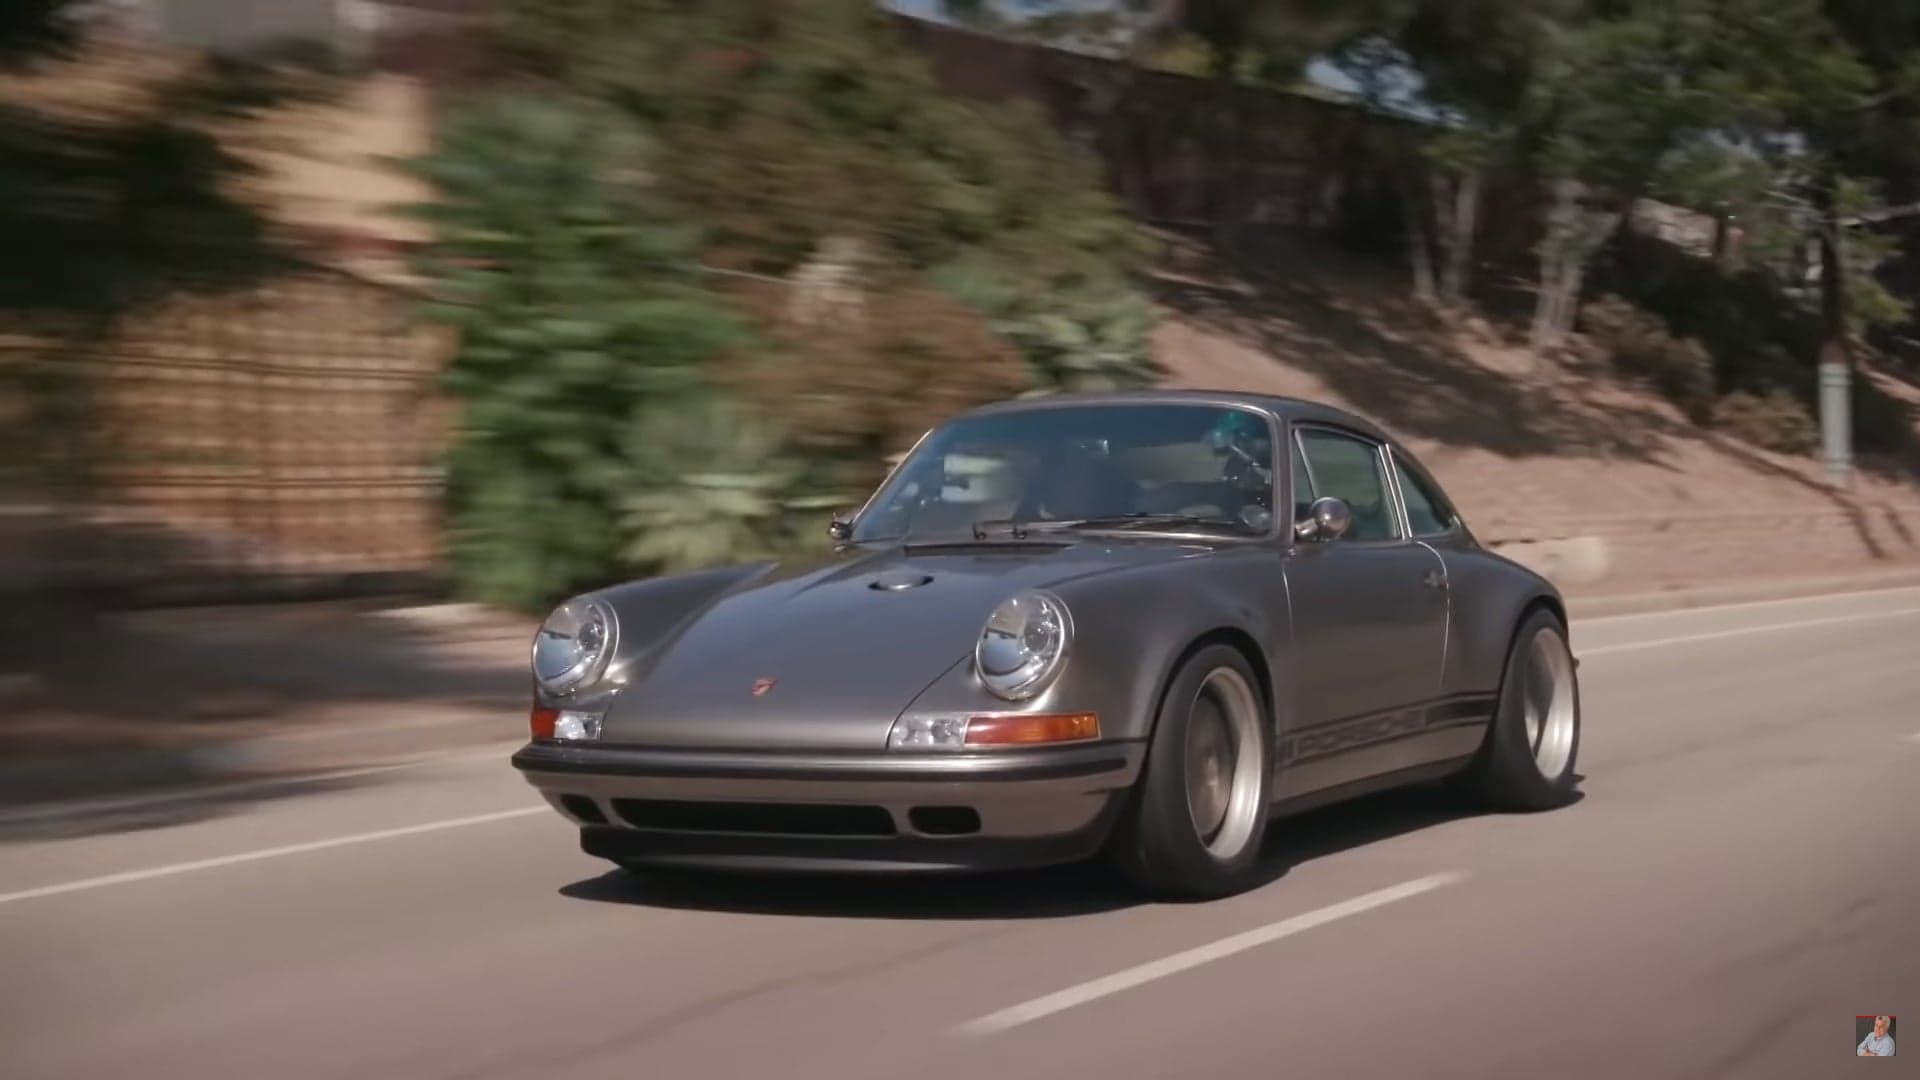 Singer Brought Its 100th Reimagined Porsche 911 to Jay Leno’s Garage